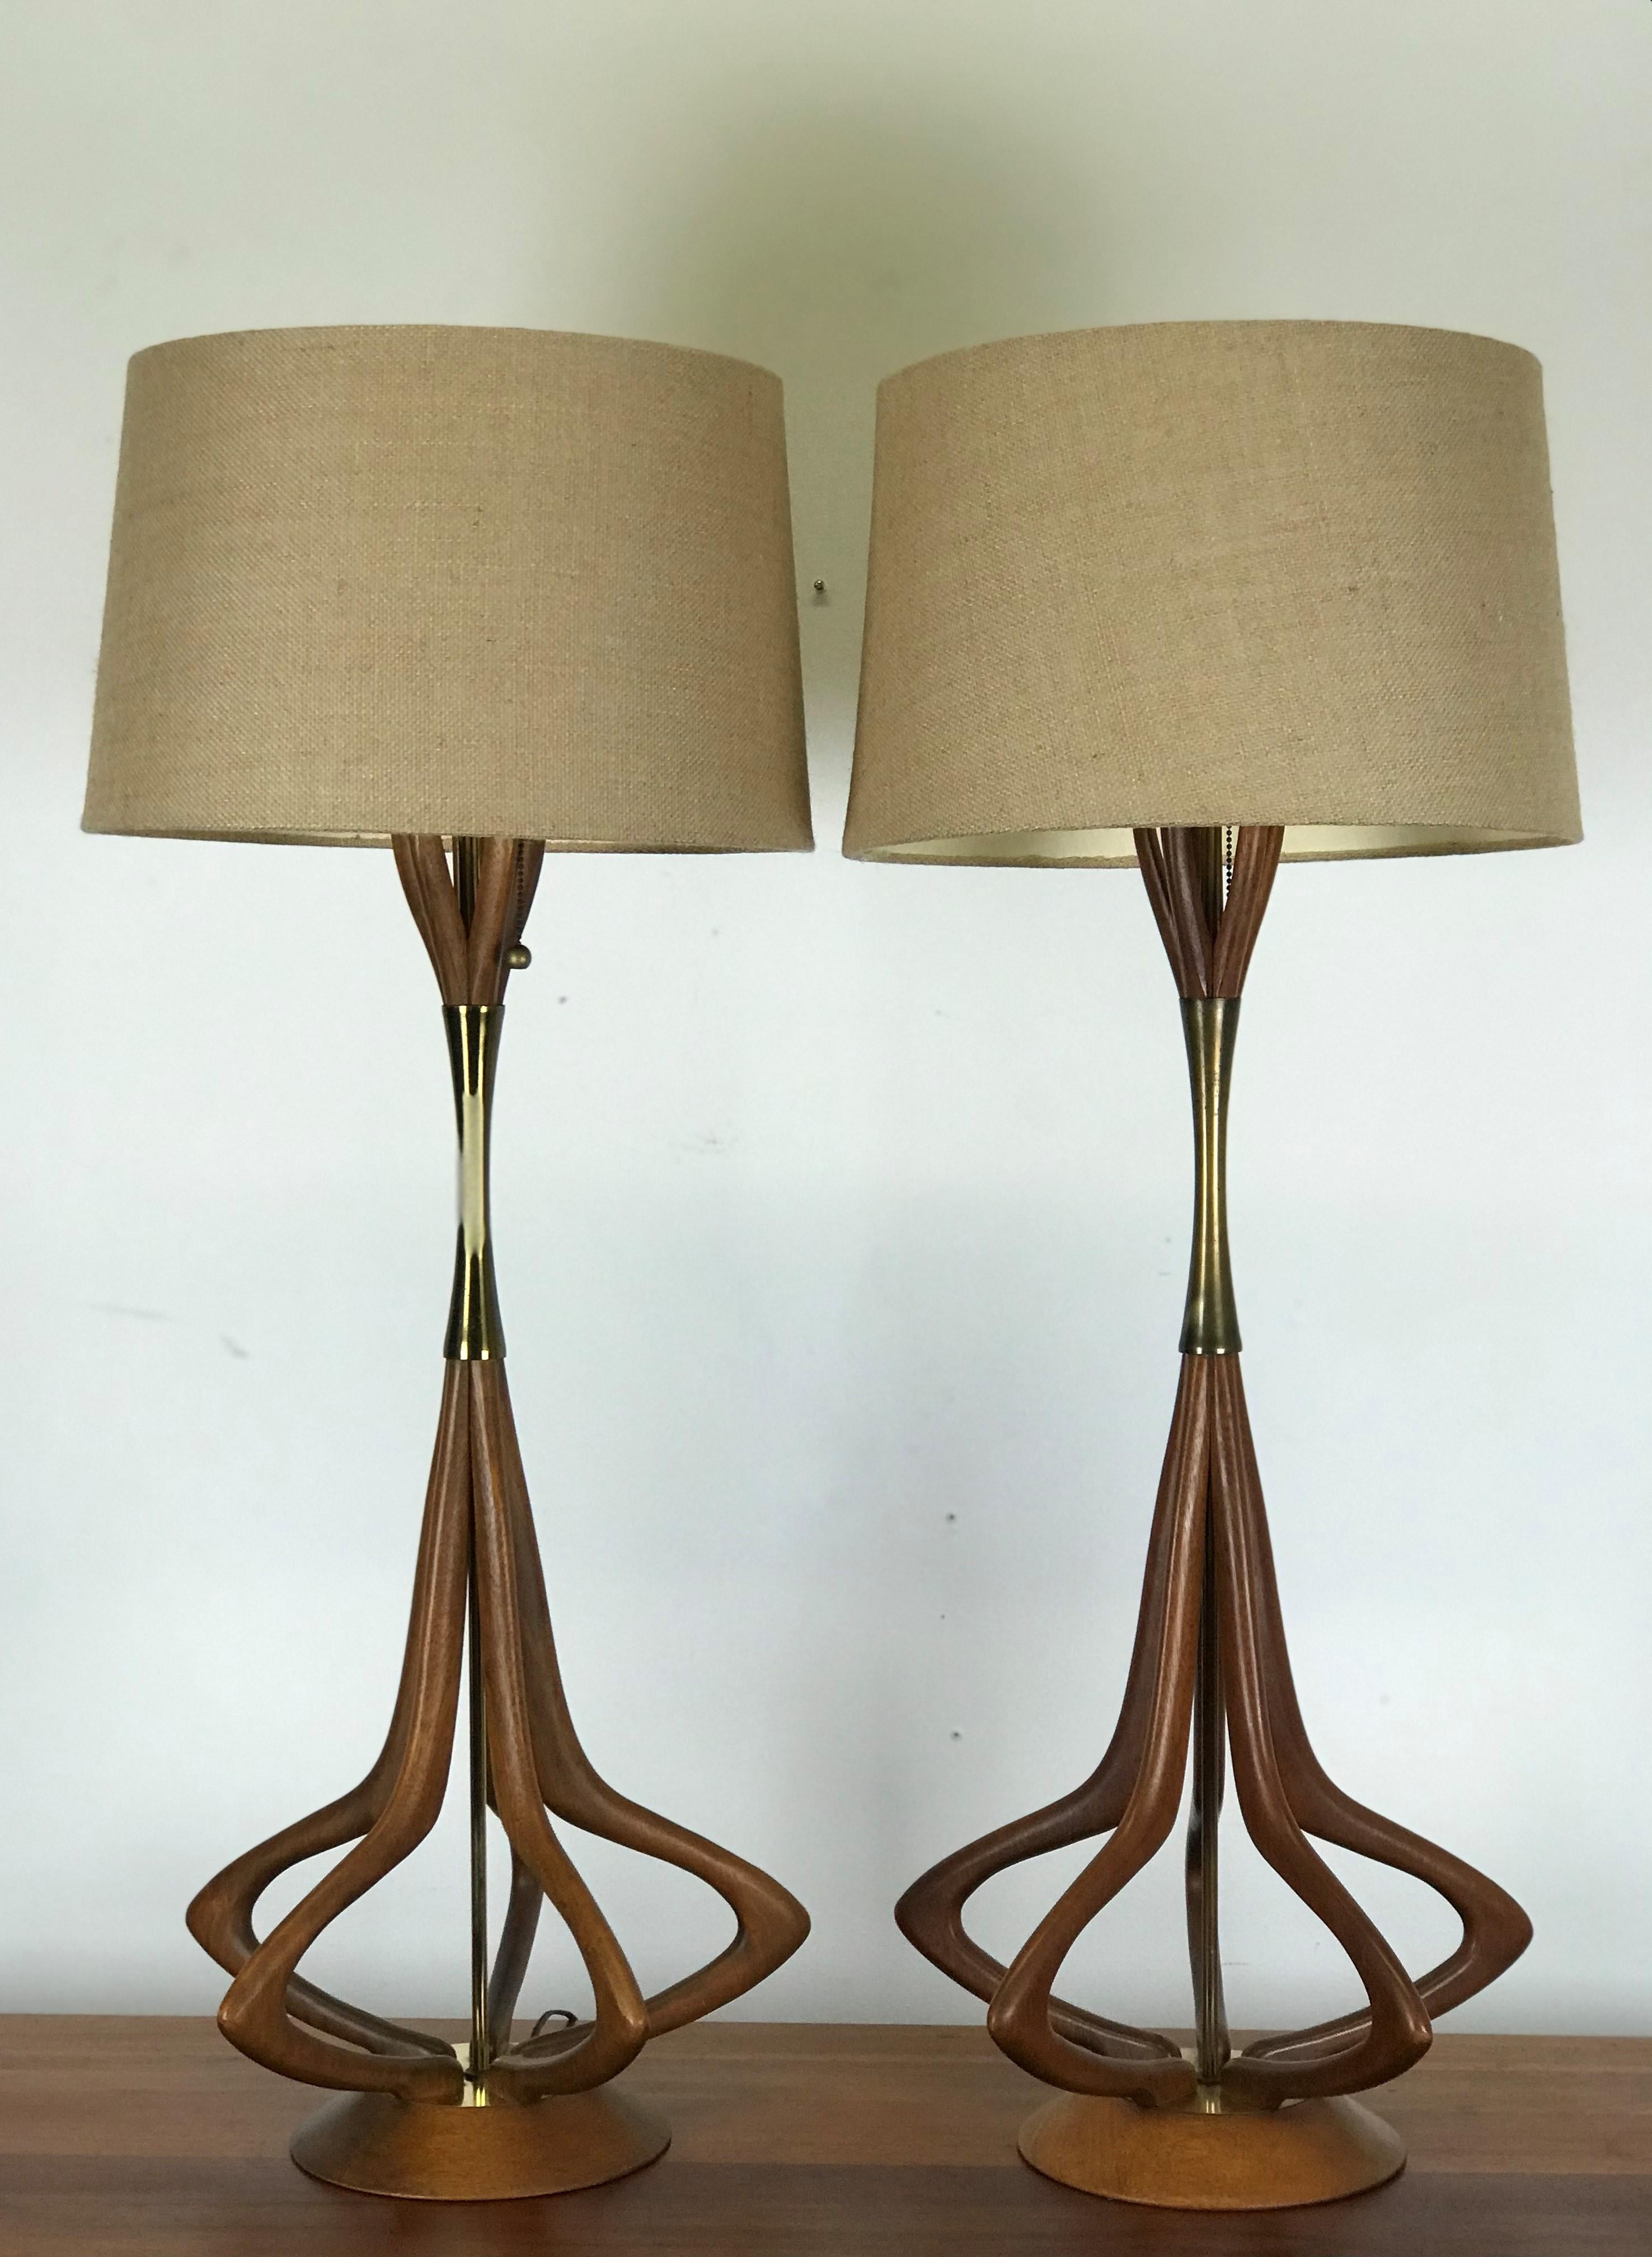 Mid-20th Century Mid-Century Modern Lamps in Sculptural Walnut with Brass Accents by Modeline